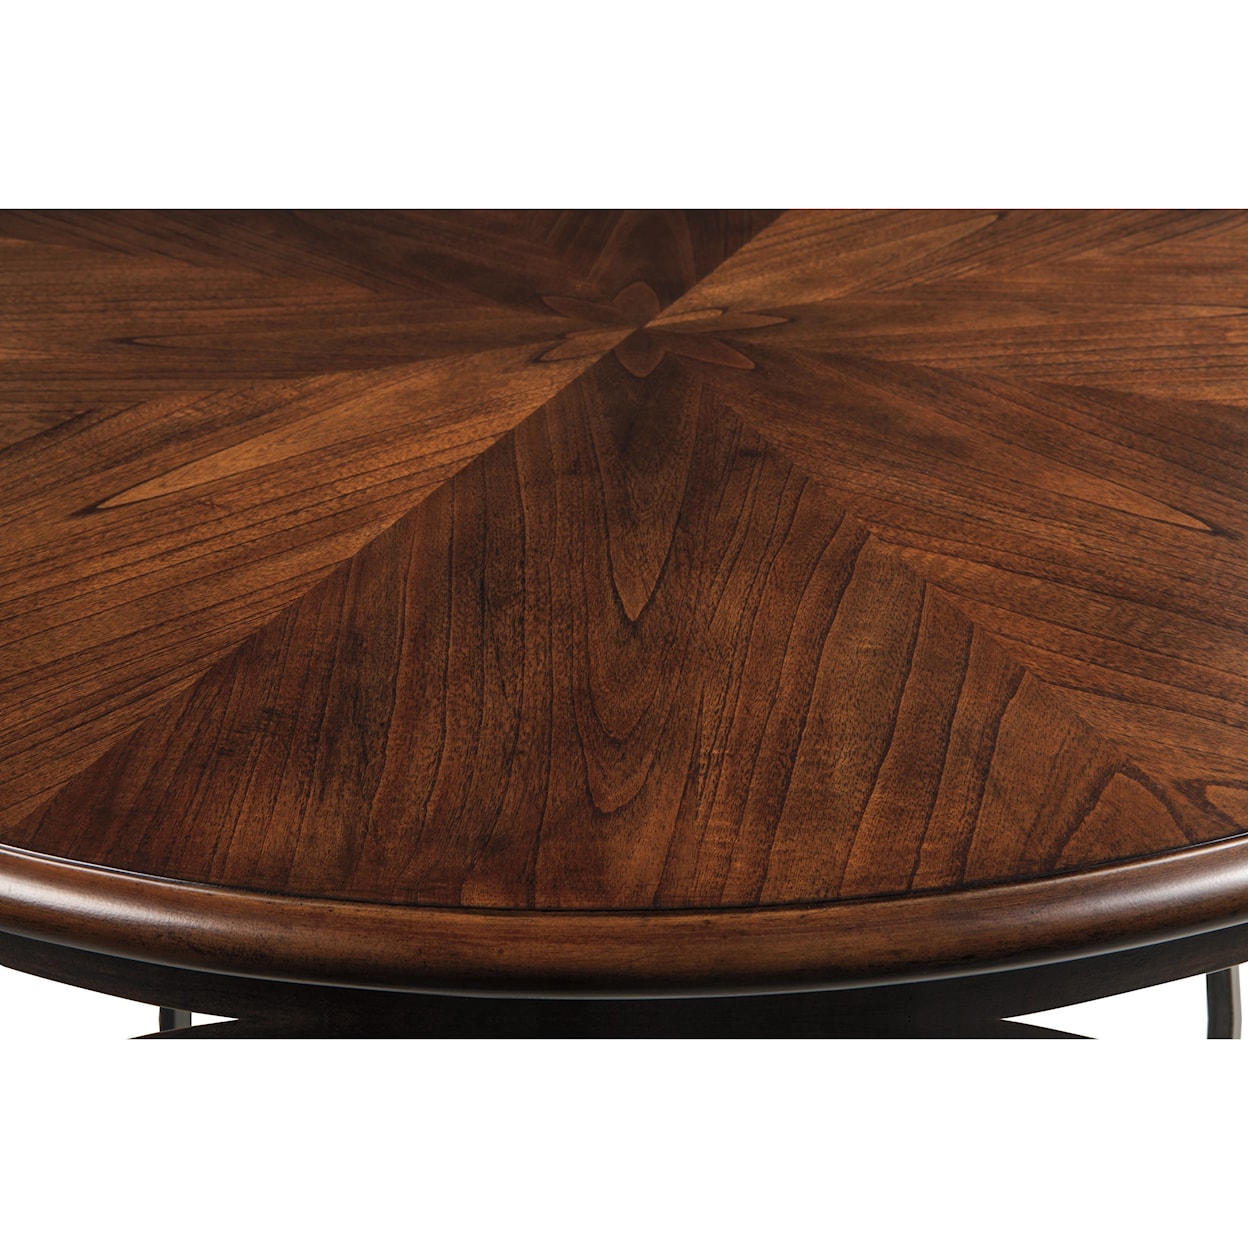 Benchcraft Centiar Round Dining Room Table